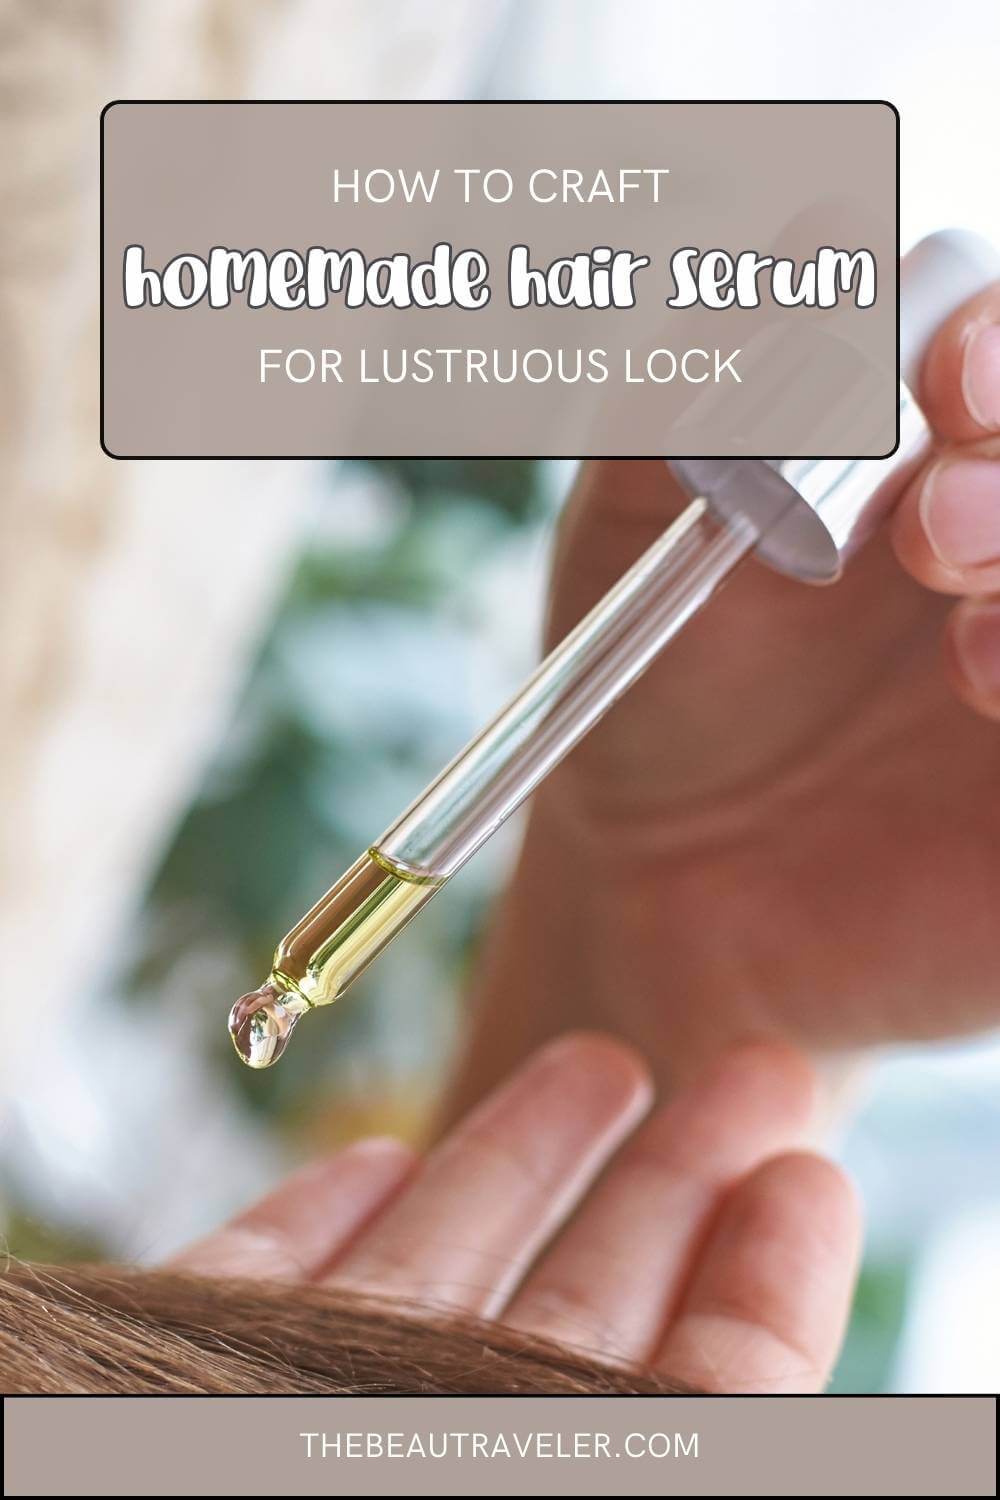 Haircare Alchemy: Crafting Homemade Serums for Lustrous Locks - The BeauTraveler